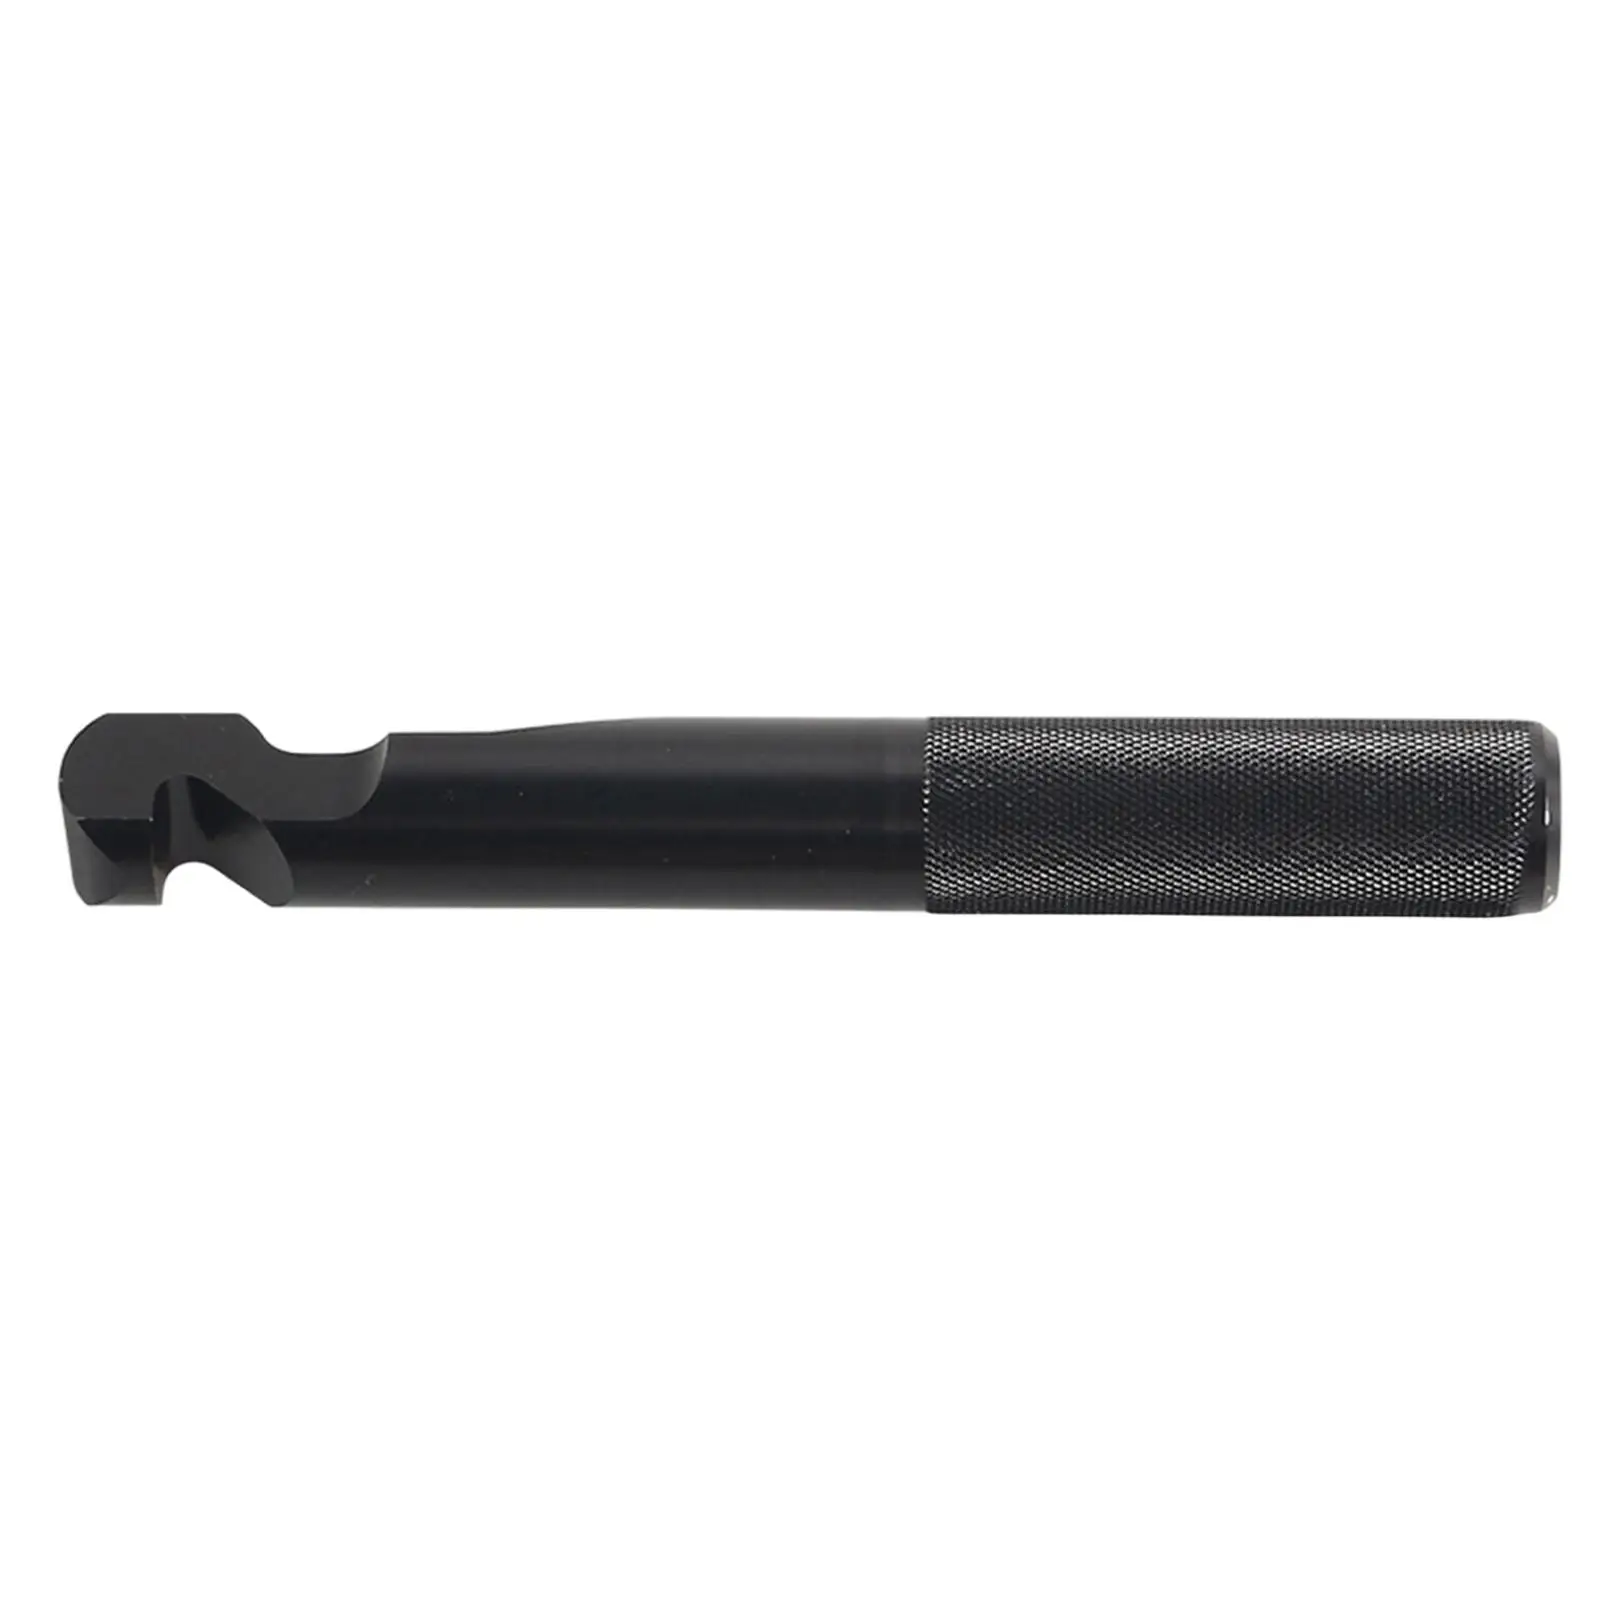 Primary Clutch Belt Changing Removal Tool Replace Parts Fit for RZR